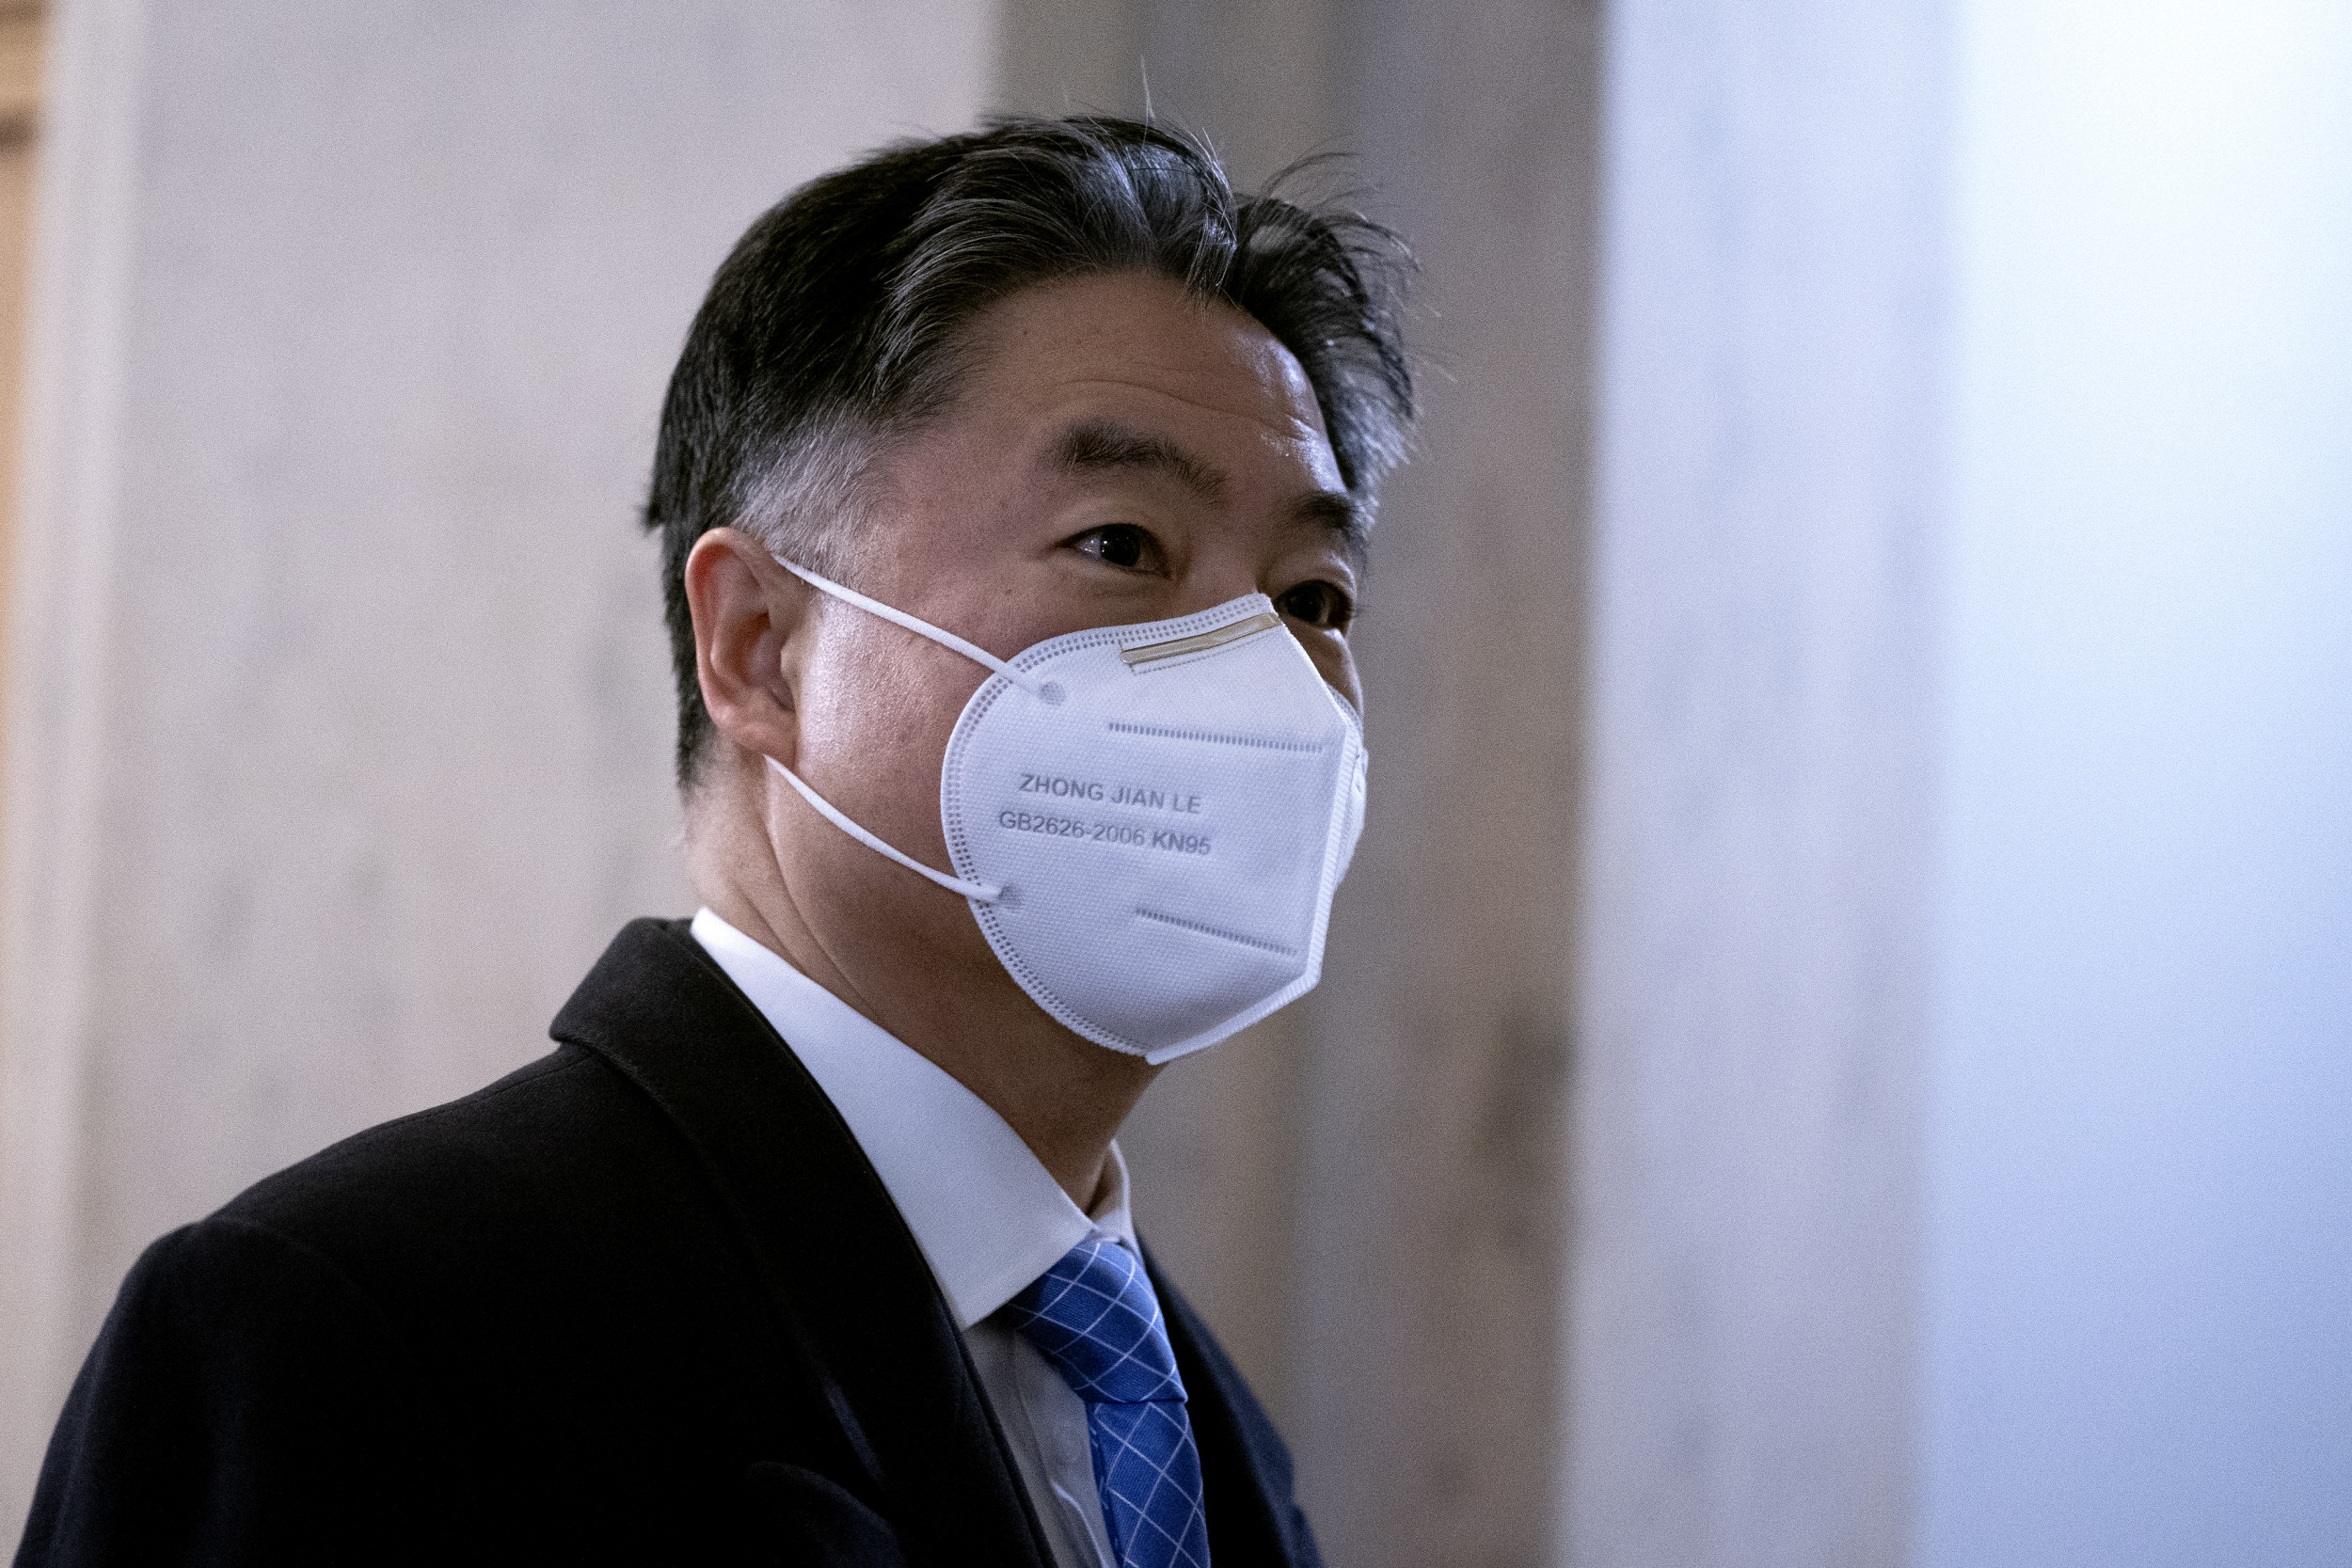 U.S. Democratic lawmaker Ted Lieu will pass $ 1,400 a week from home